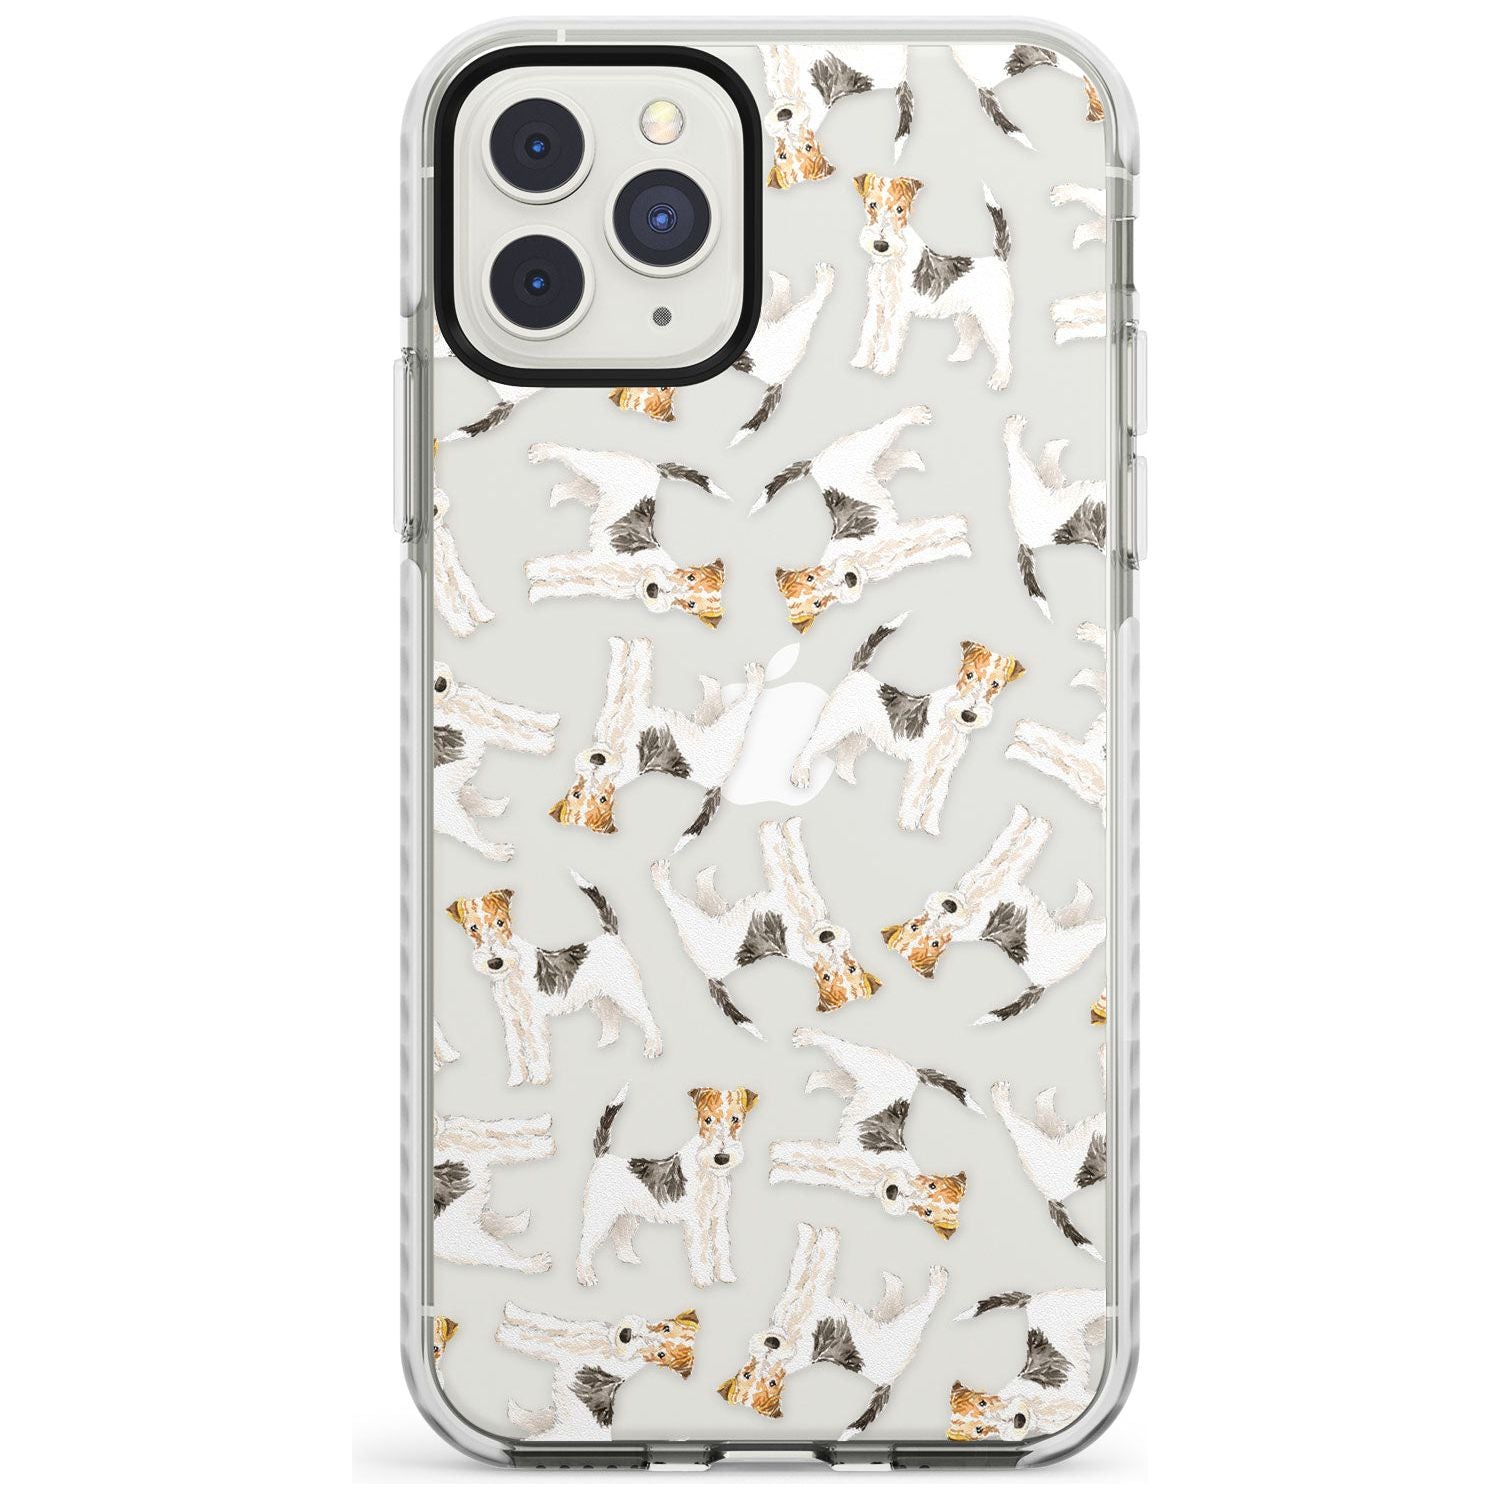 Wire Haired Fox Terrier Watercolour Dog Pattern Impact Phone Case for iPhone 11 Pro Max